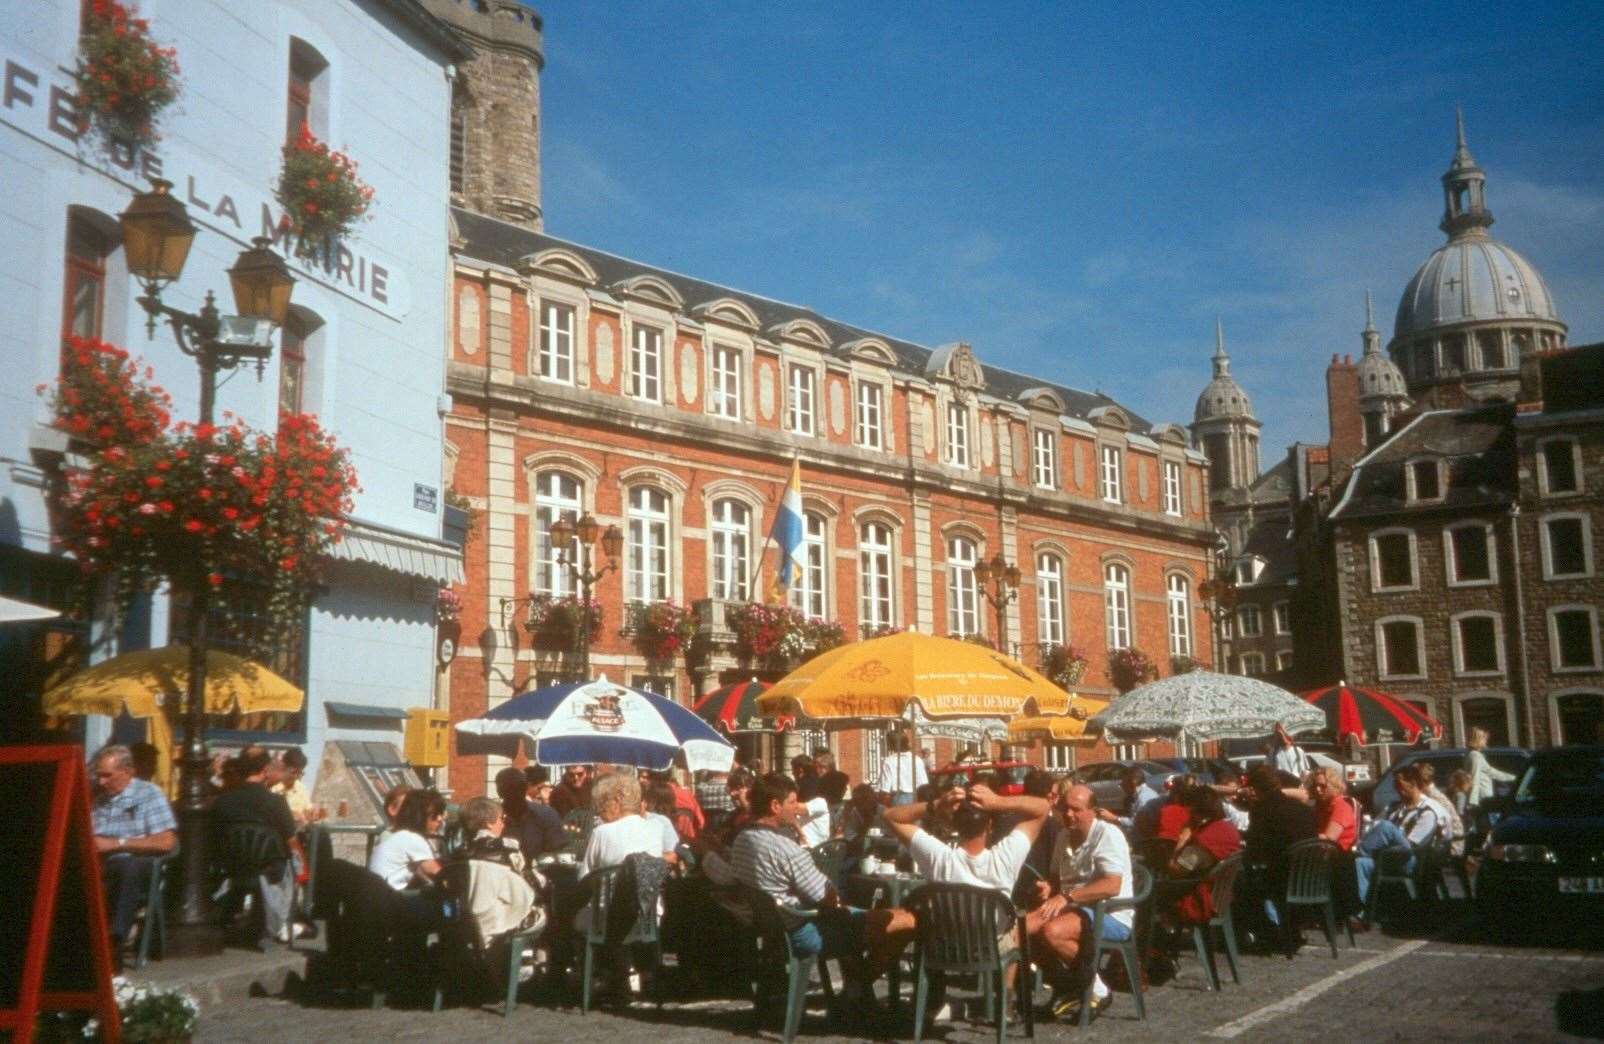 The Hotel de Ville made a fine backdrop for a drink in Boulogne. Picture Nick Stevens